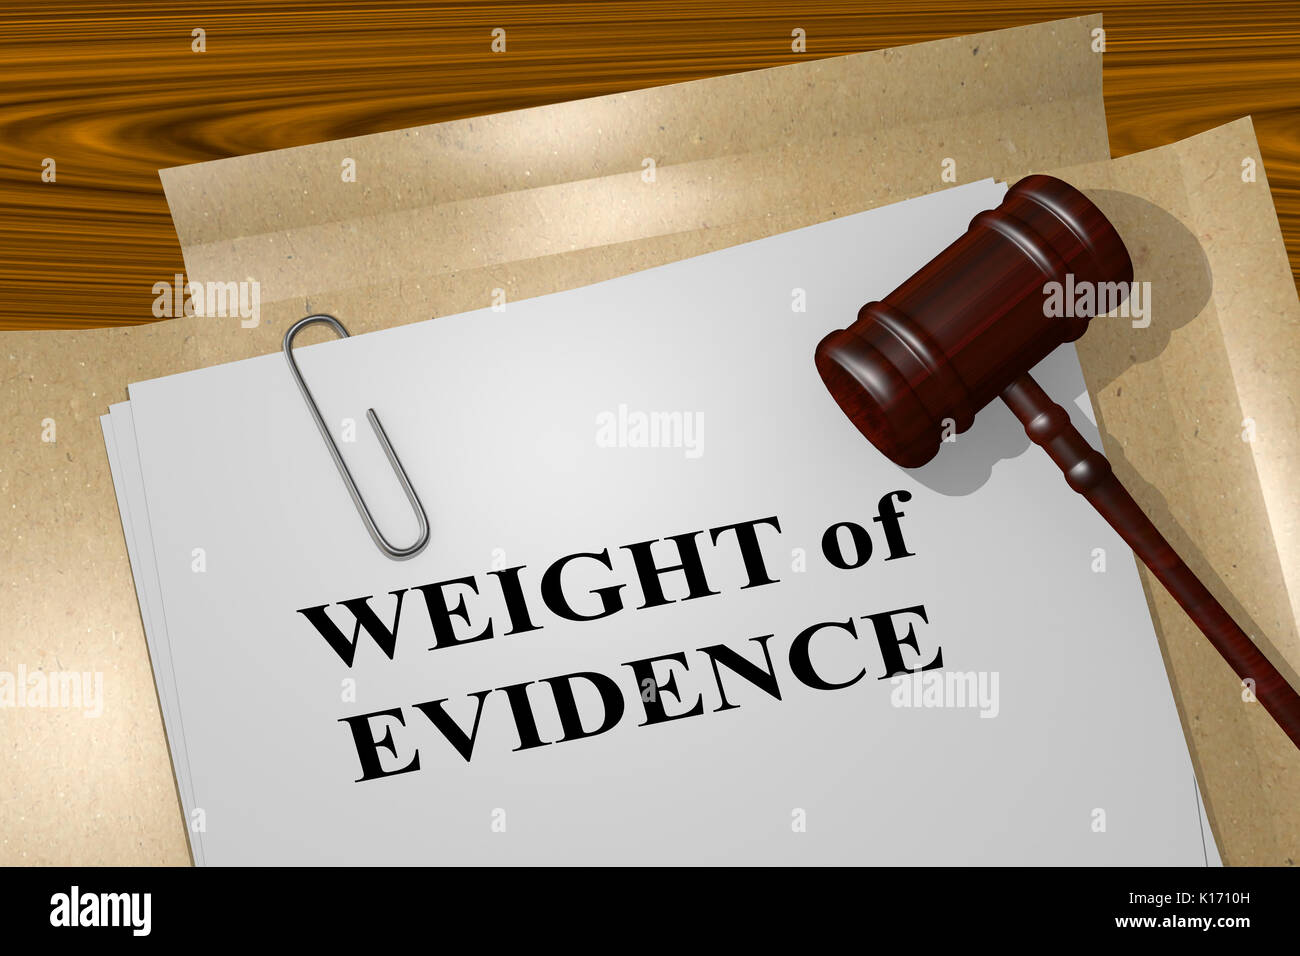 3D illustration of 'WEIGHT of EVIDENCE' title on legal document Stock Photo